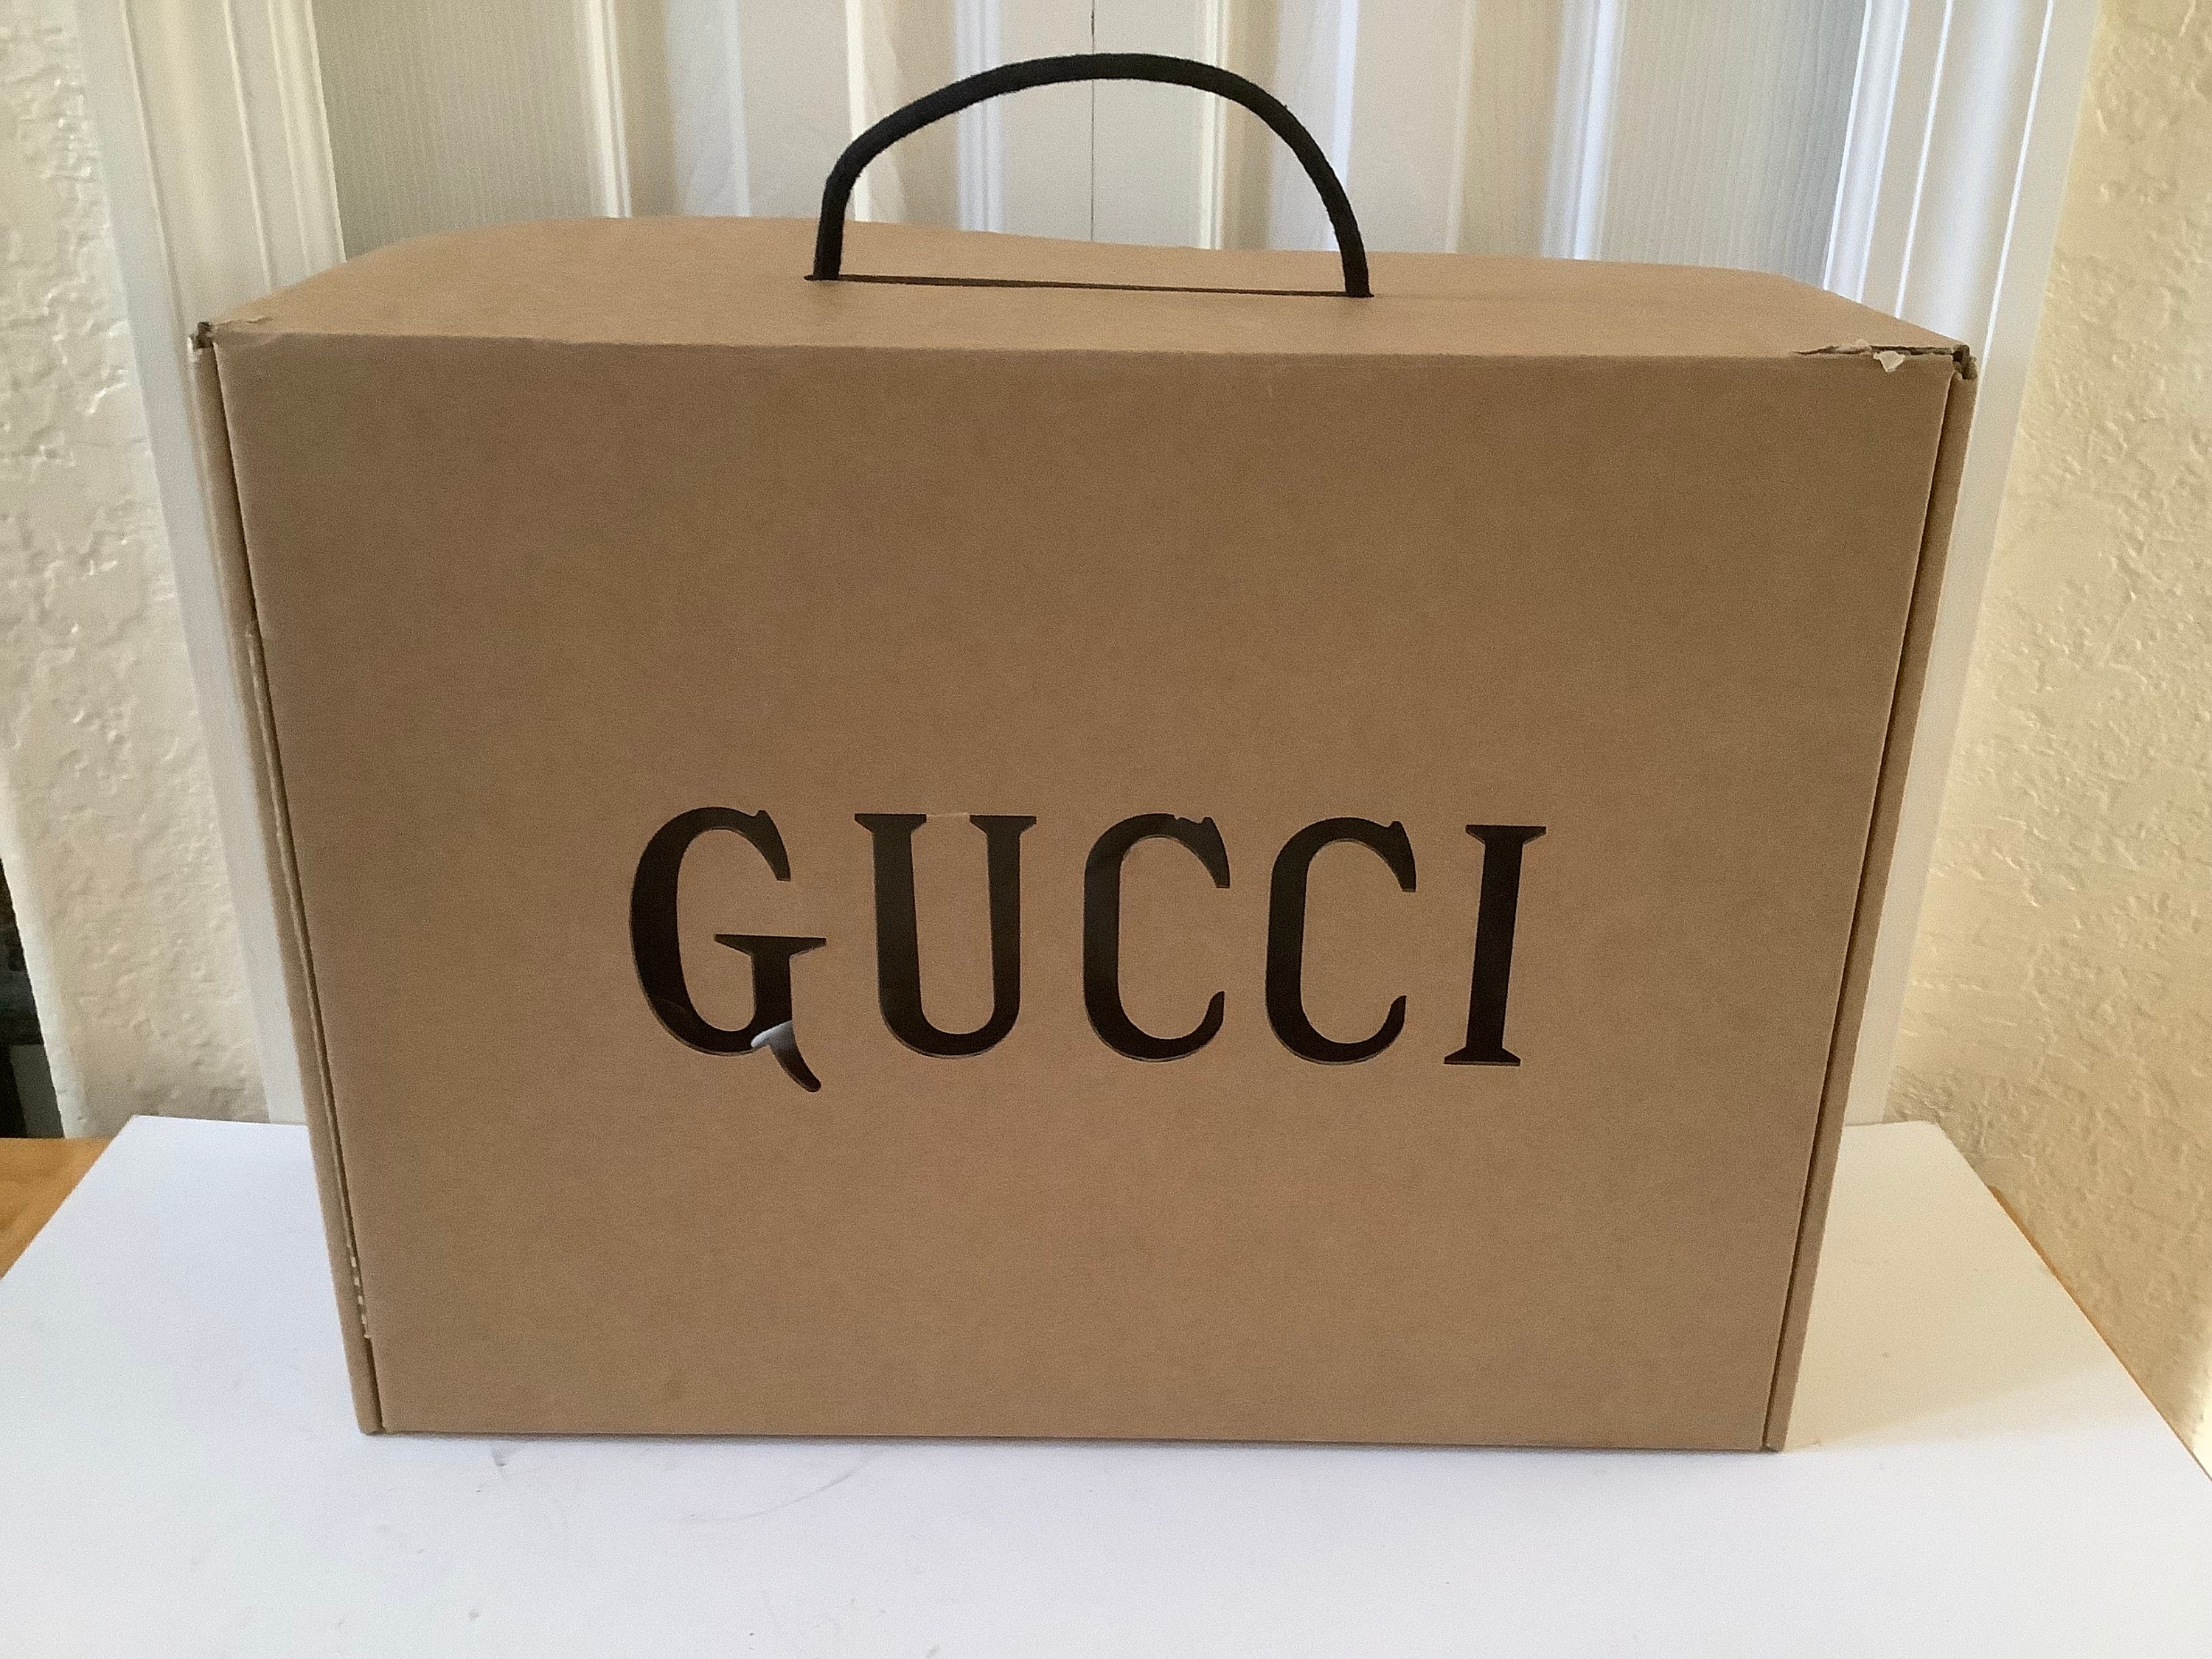 Gucci Bag and Shoes 